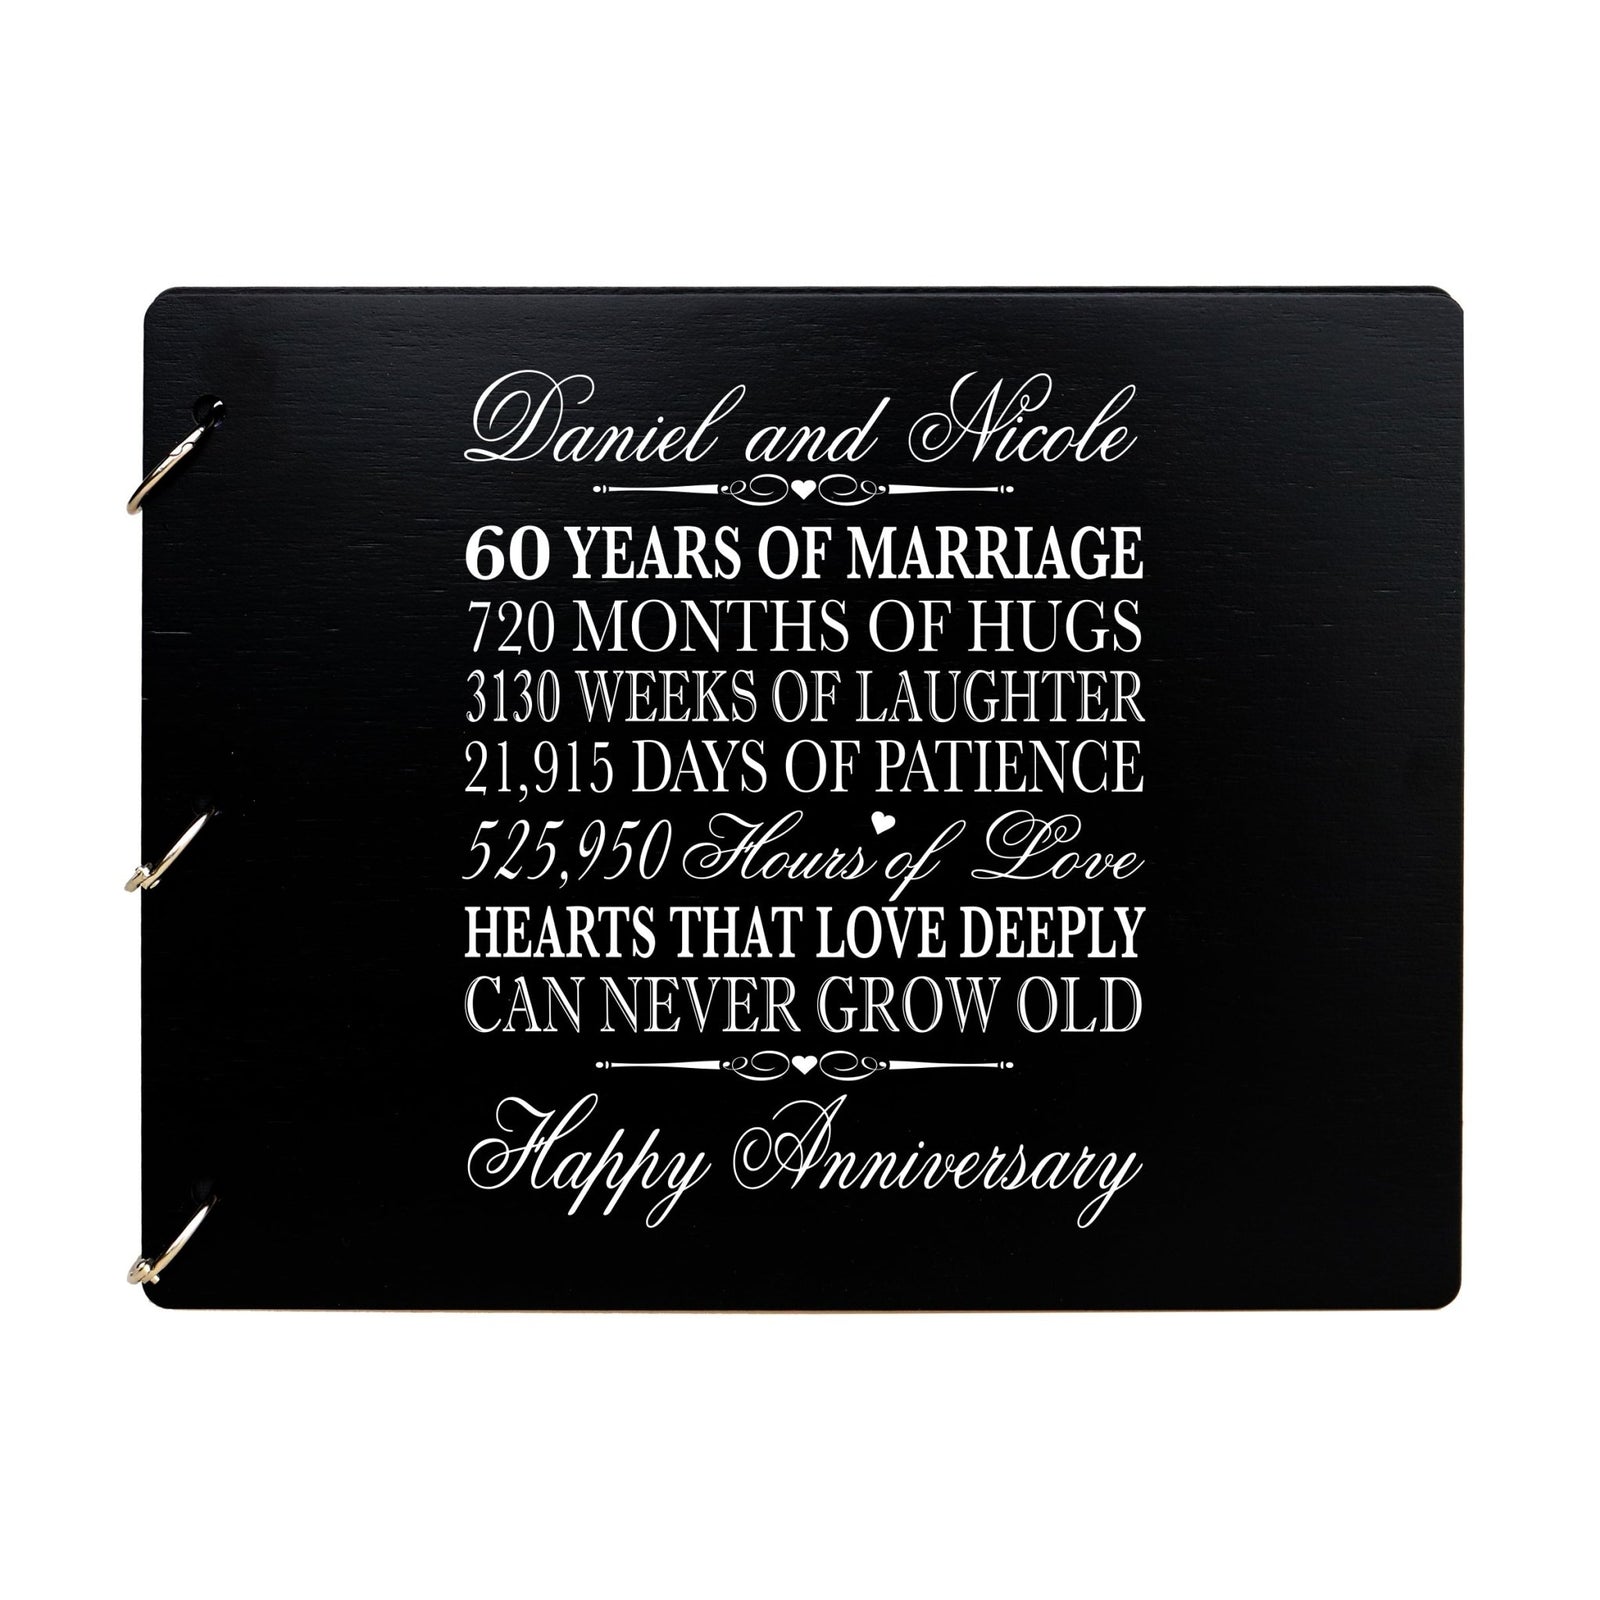 Personalized Guest Book Sign for 60th Wedding Anniversary - Hearts That Love - LifeSong Milestones